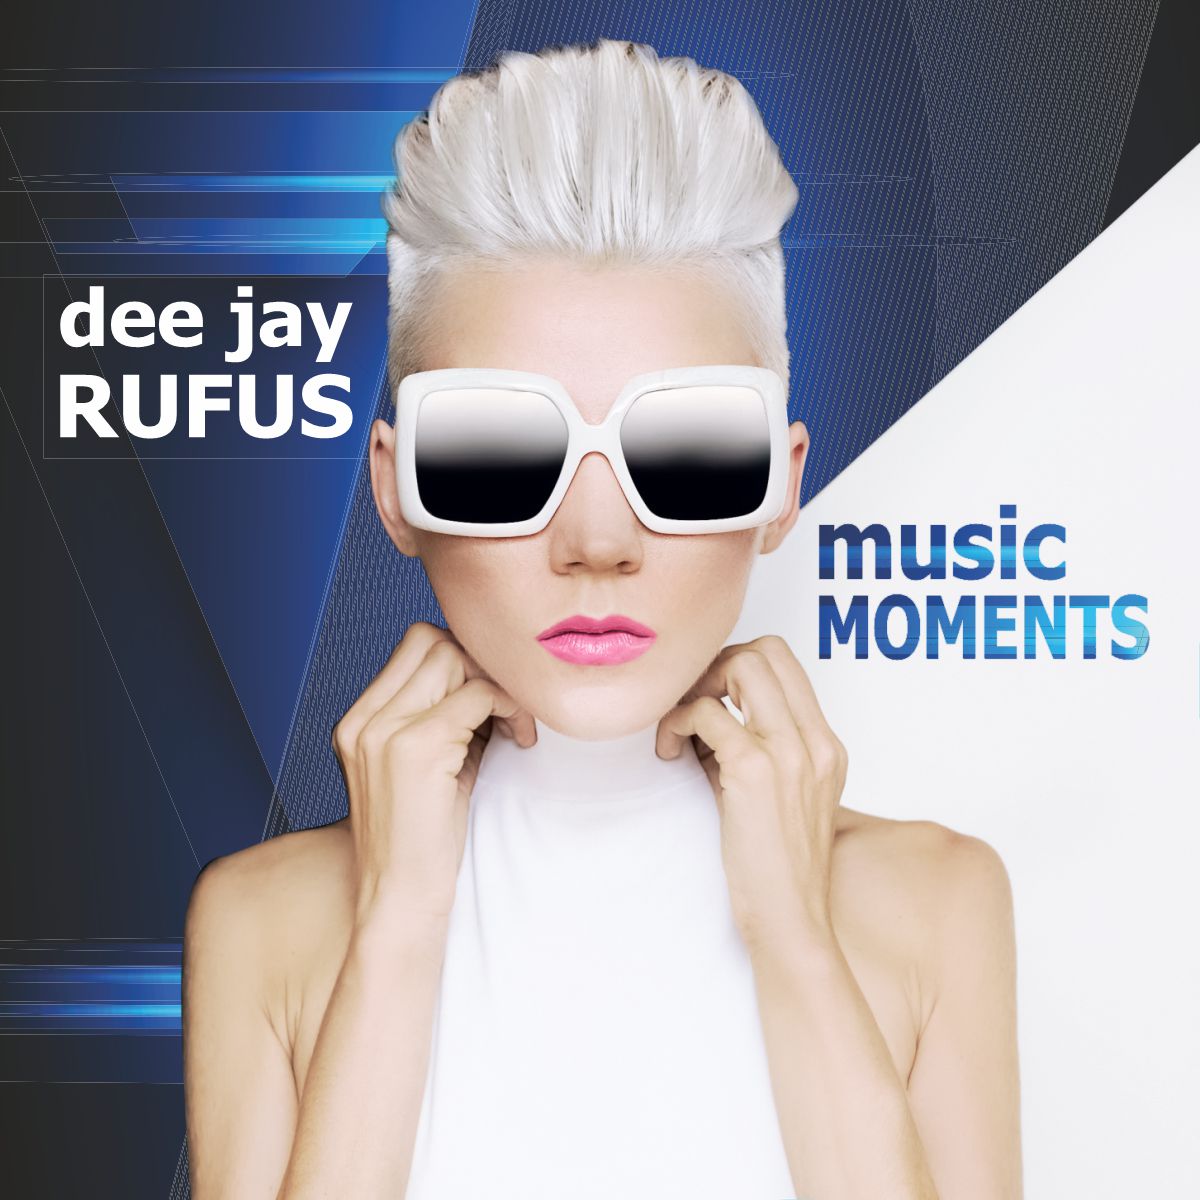 dee jay RUFUS - music moments - Frontcover.jpg